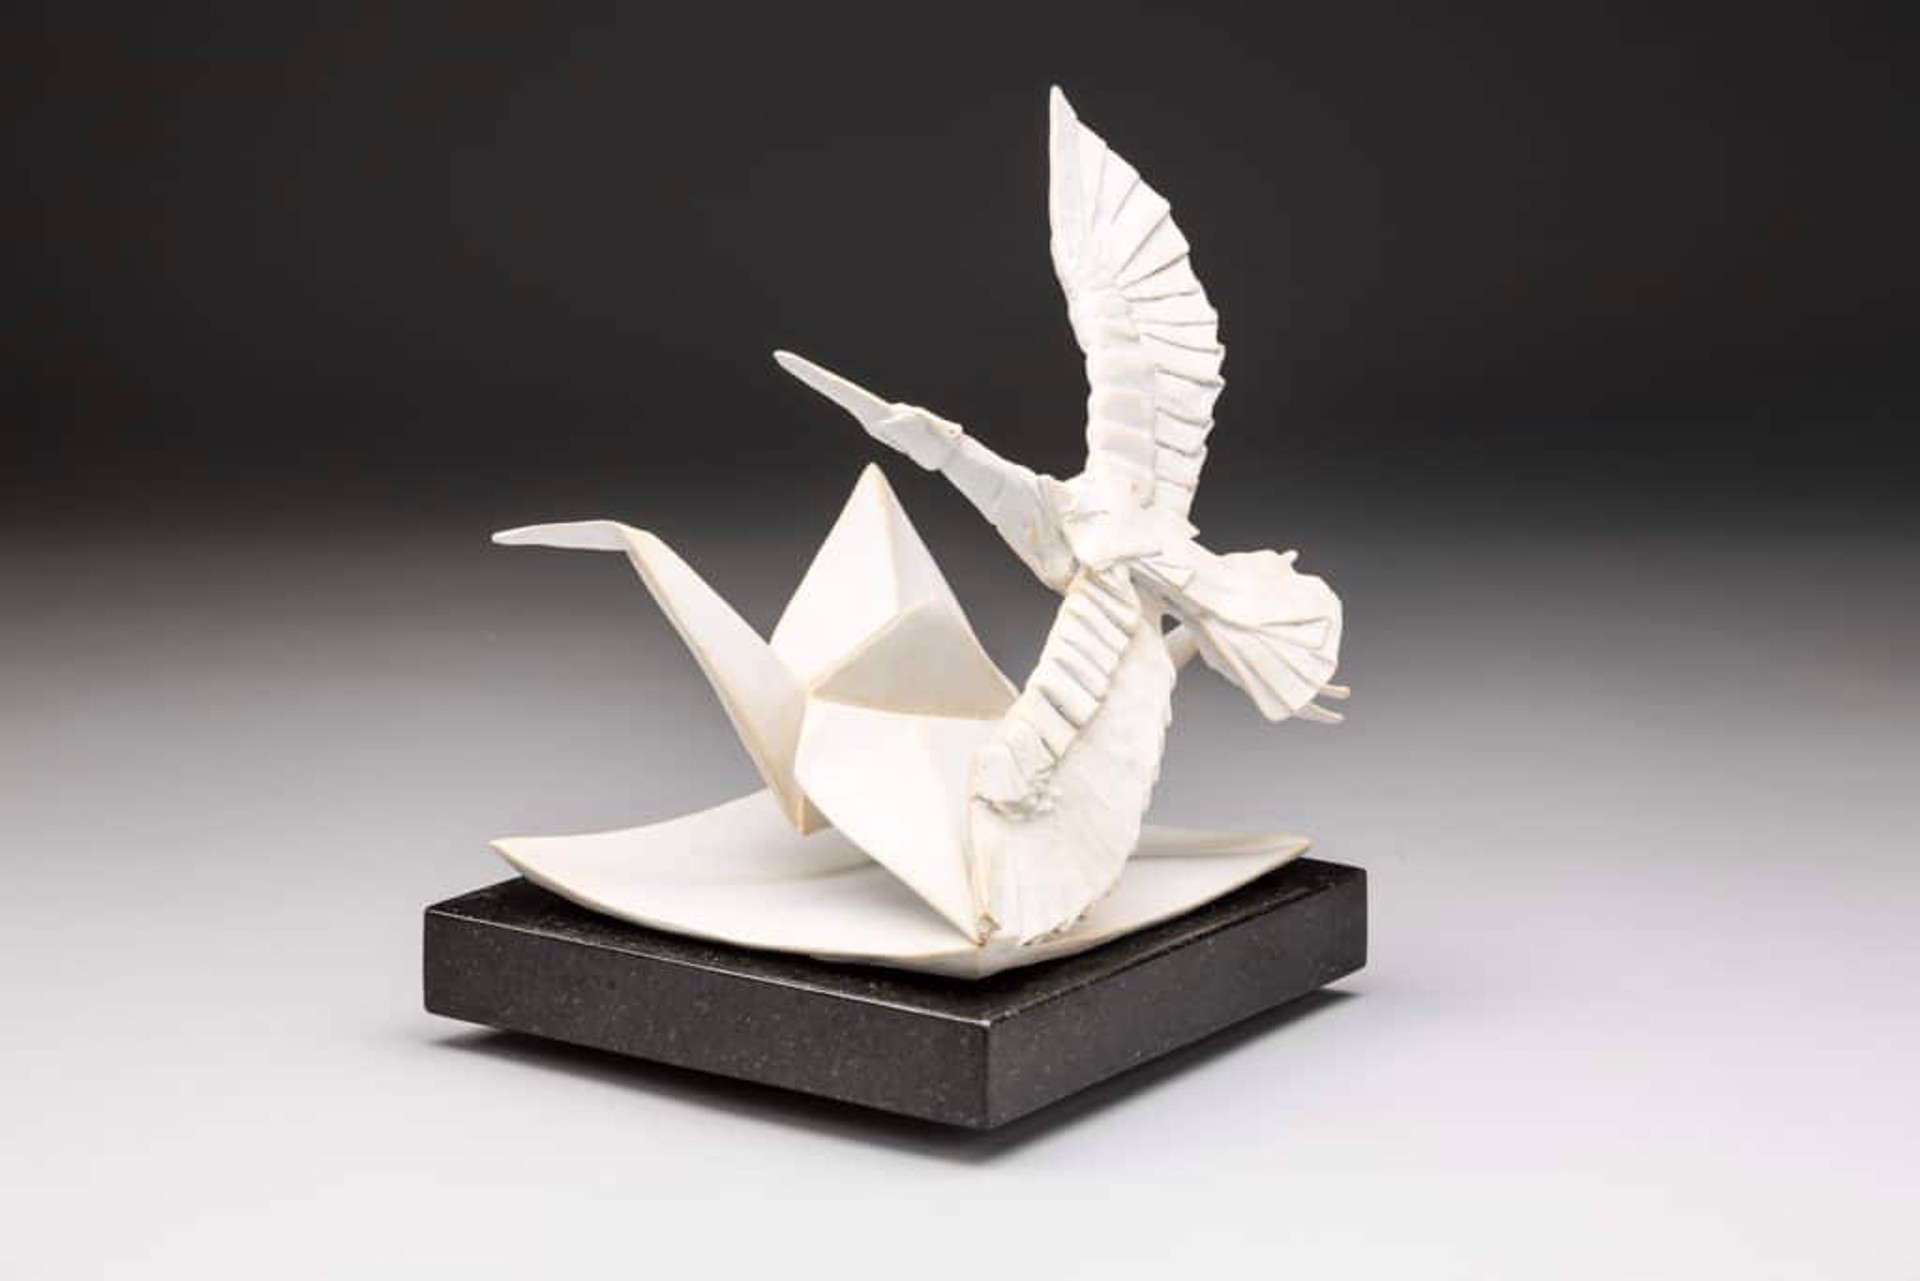 Flight of Folds (collaboration with Robert Lang) by KEVIN BOX